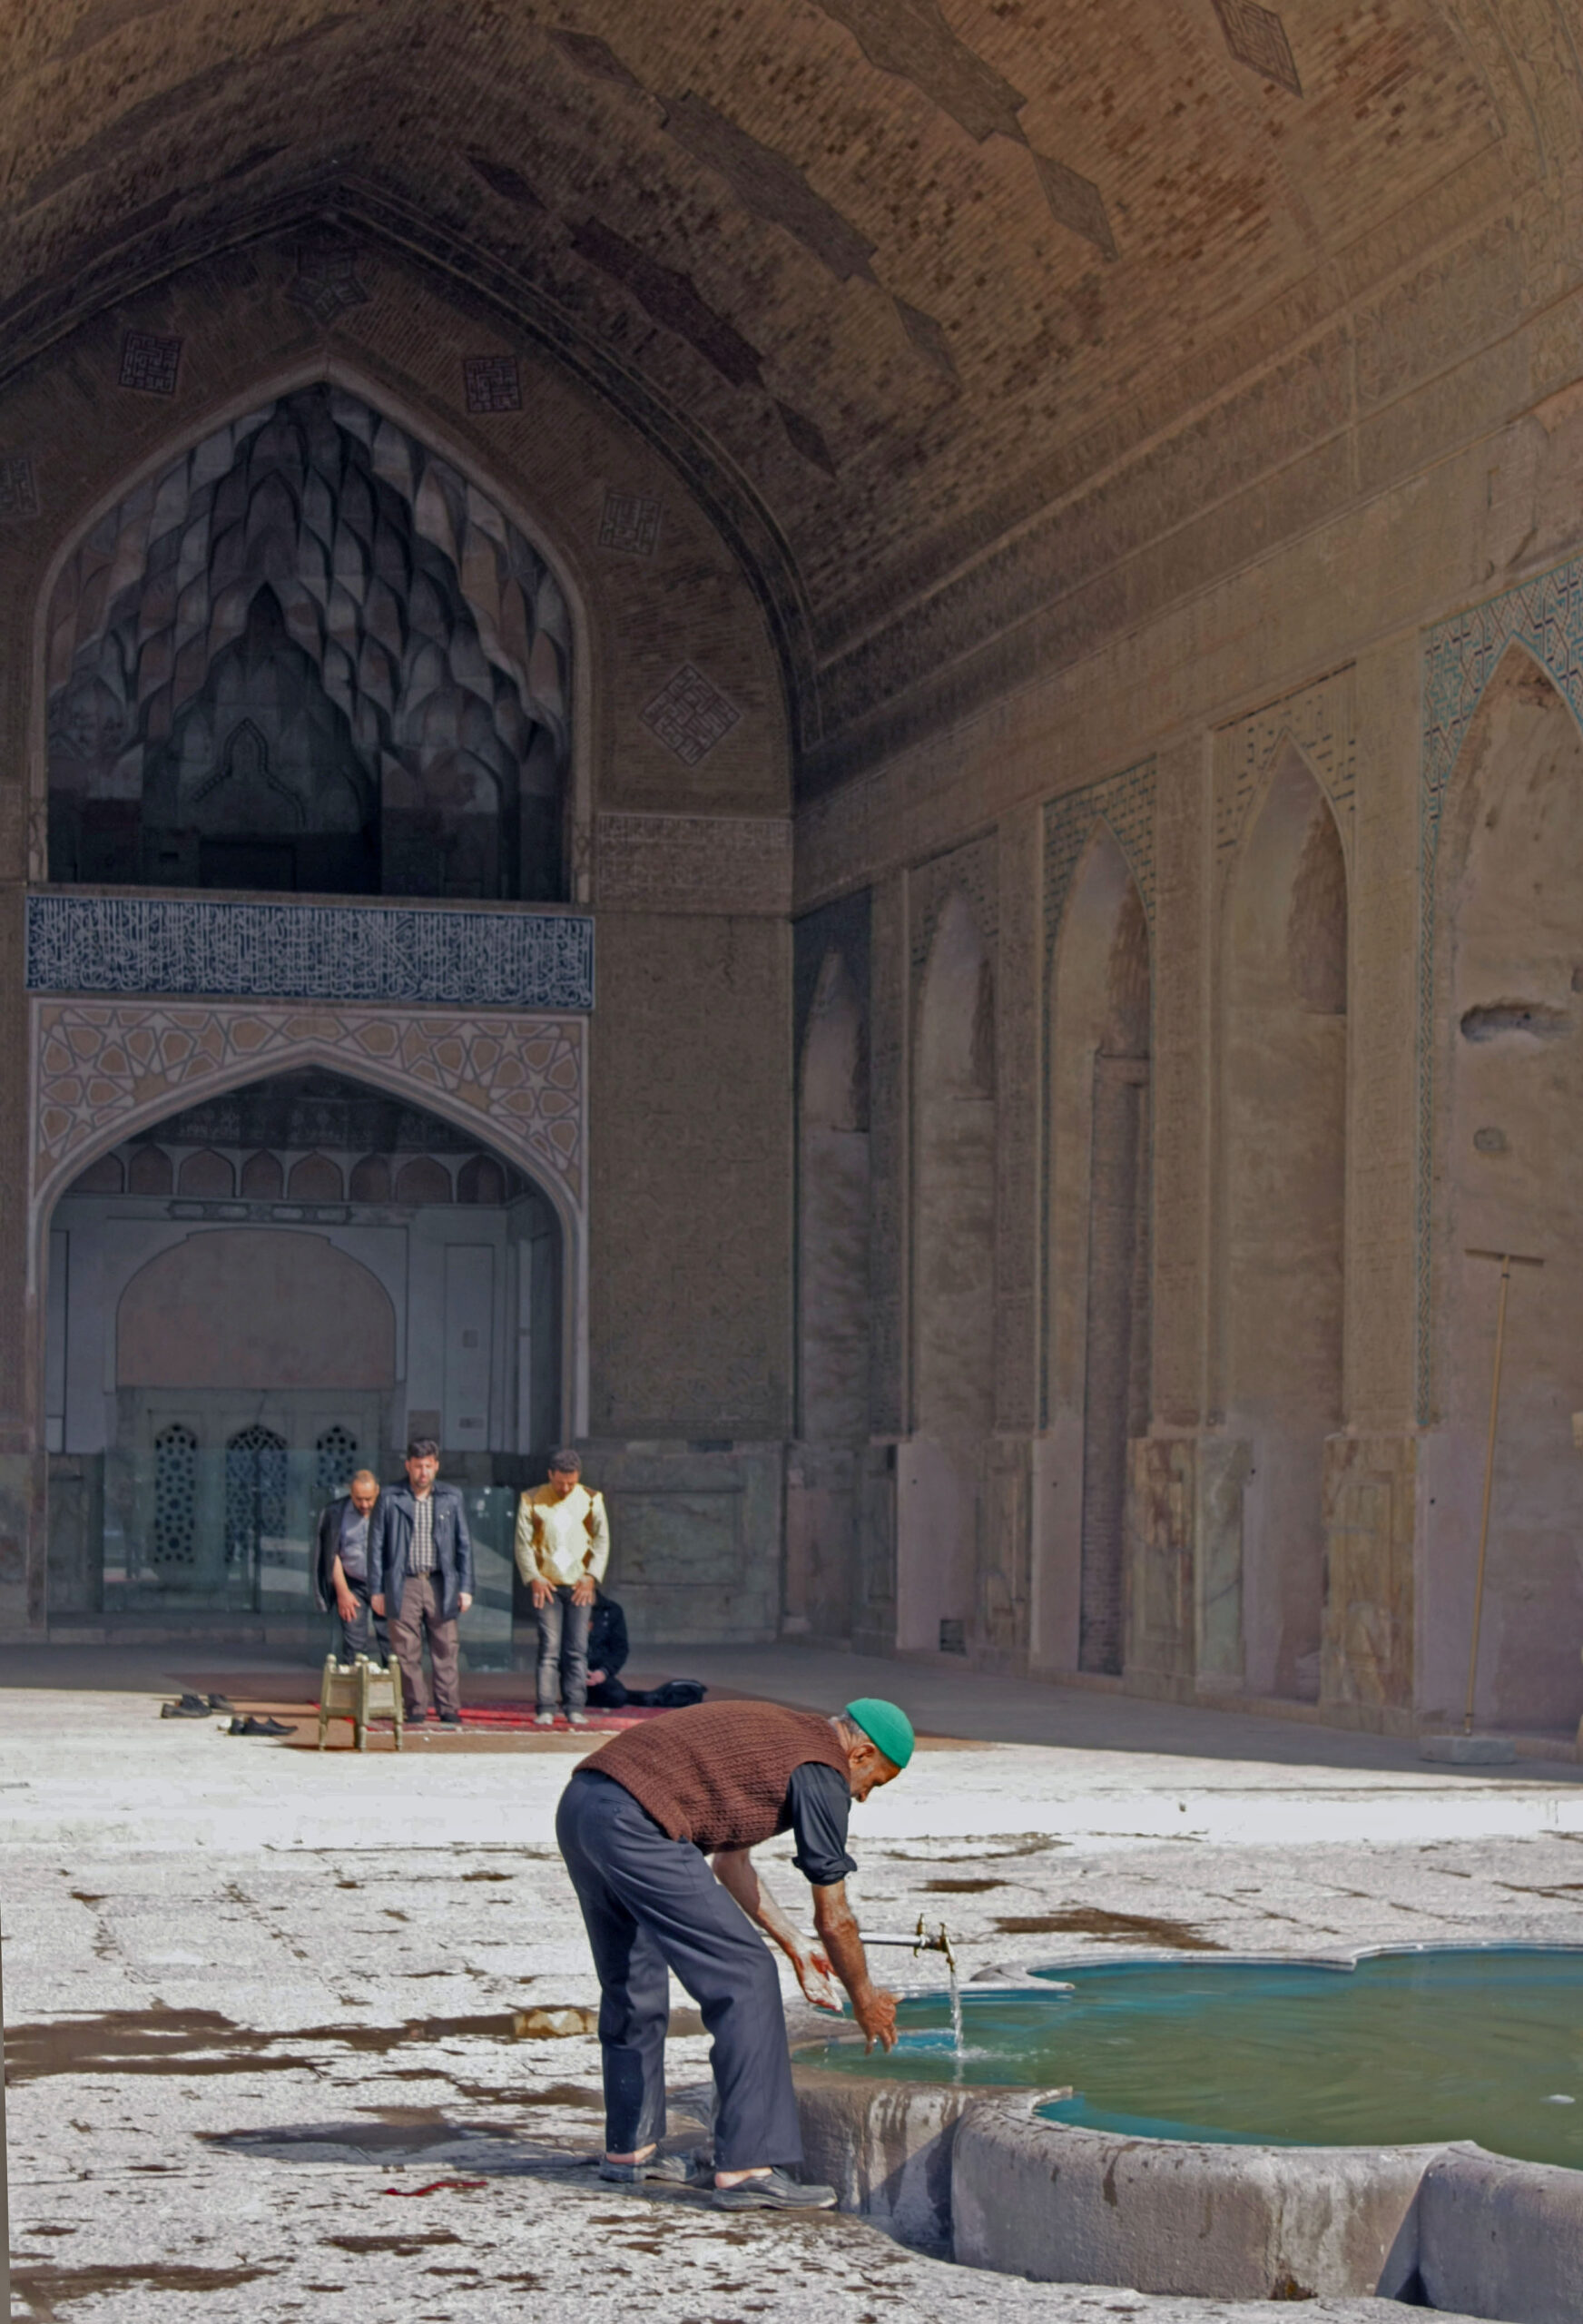 Image of Man performing ablution, and men praying in the background, in the courtyard of a mosque in Iran.